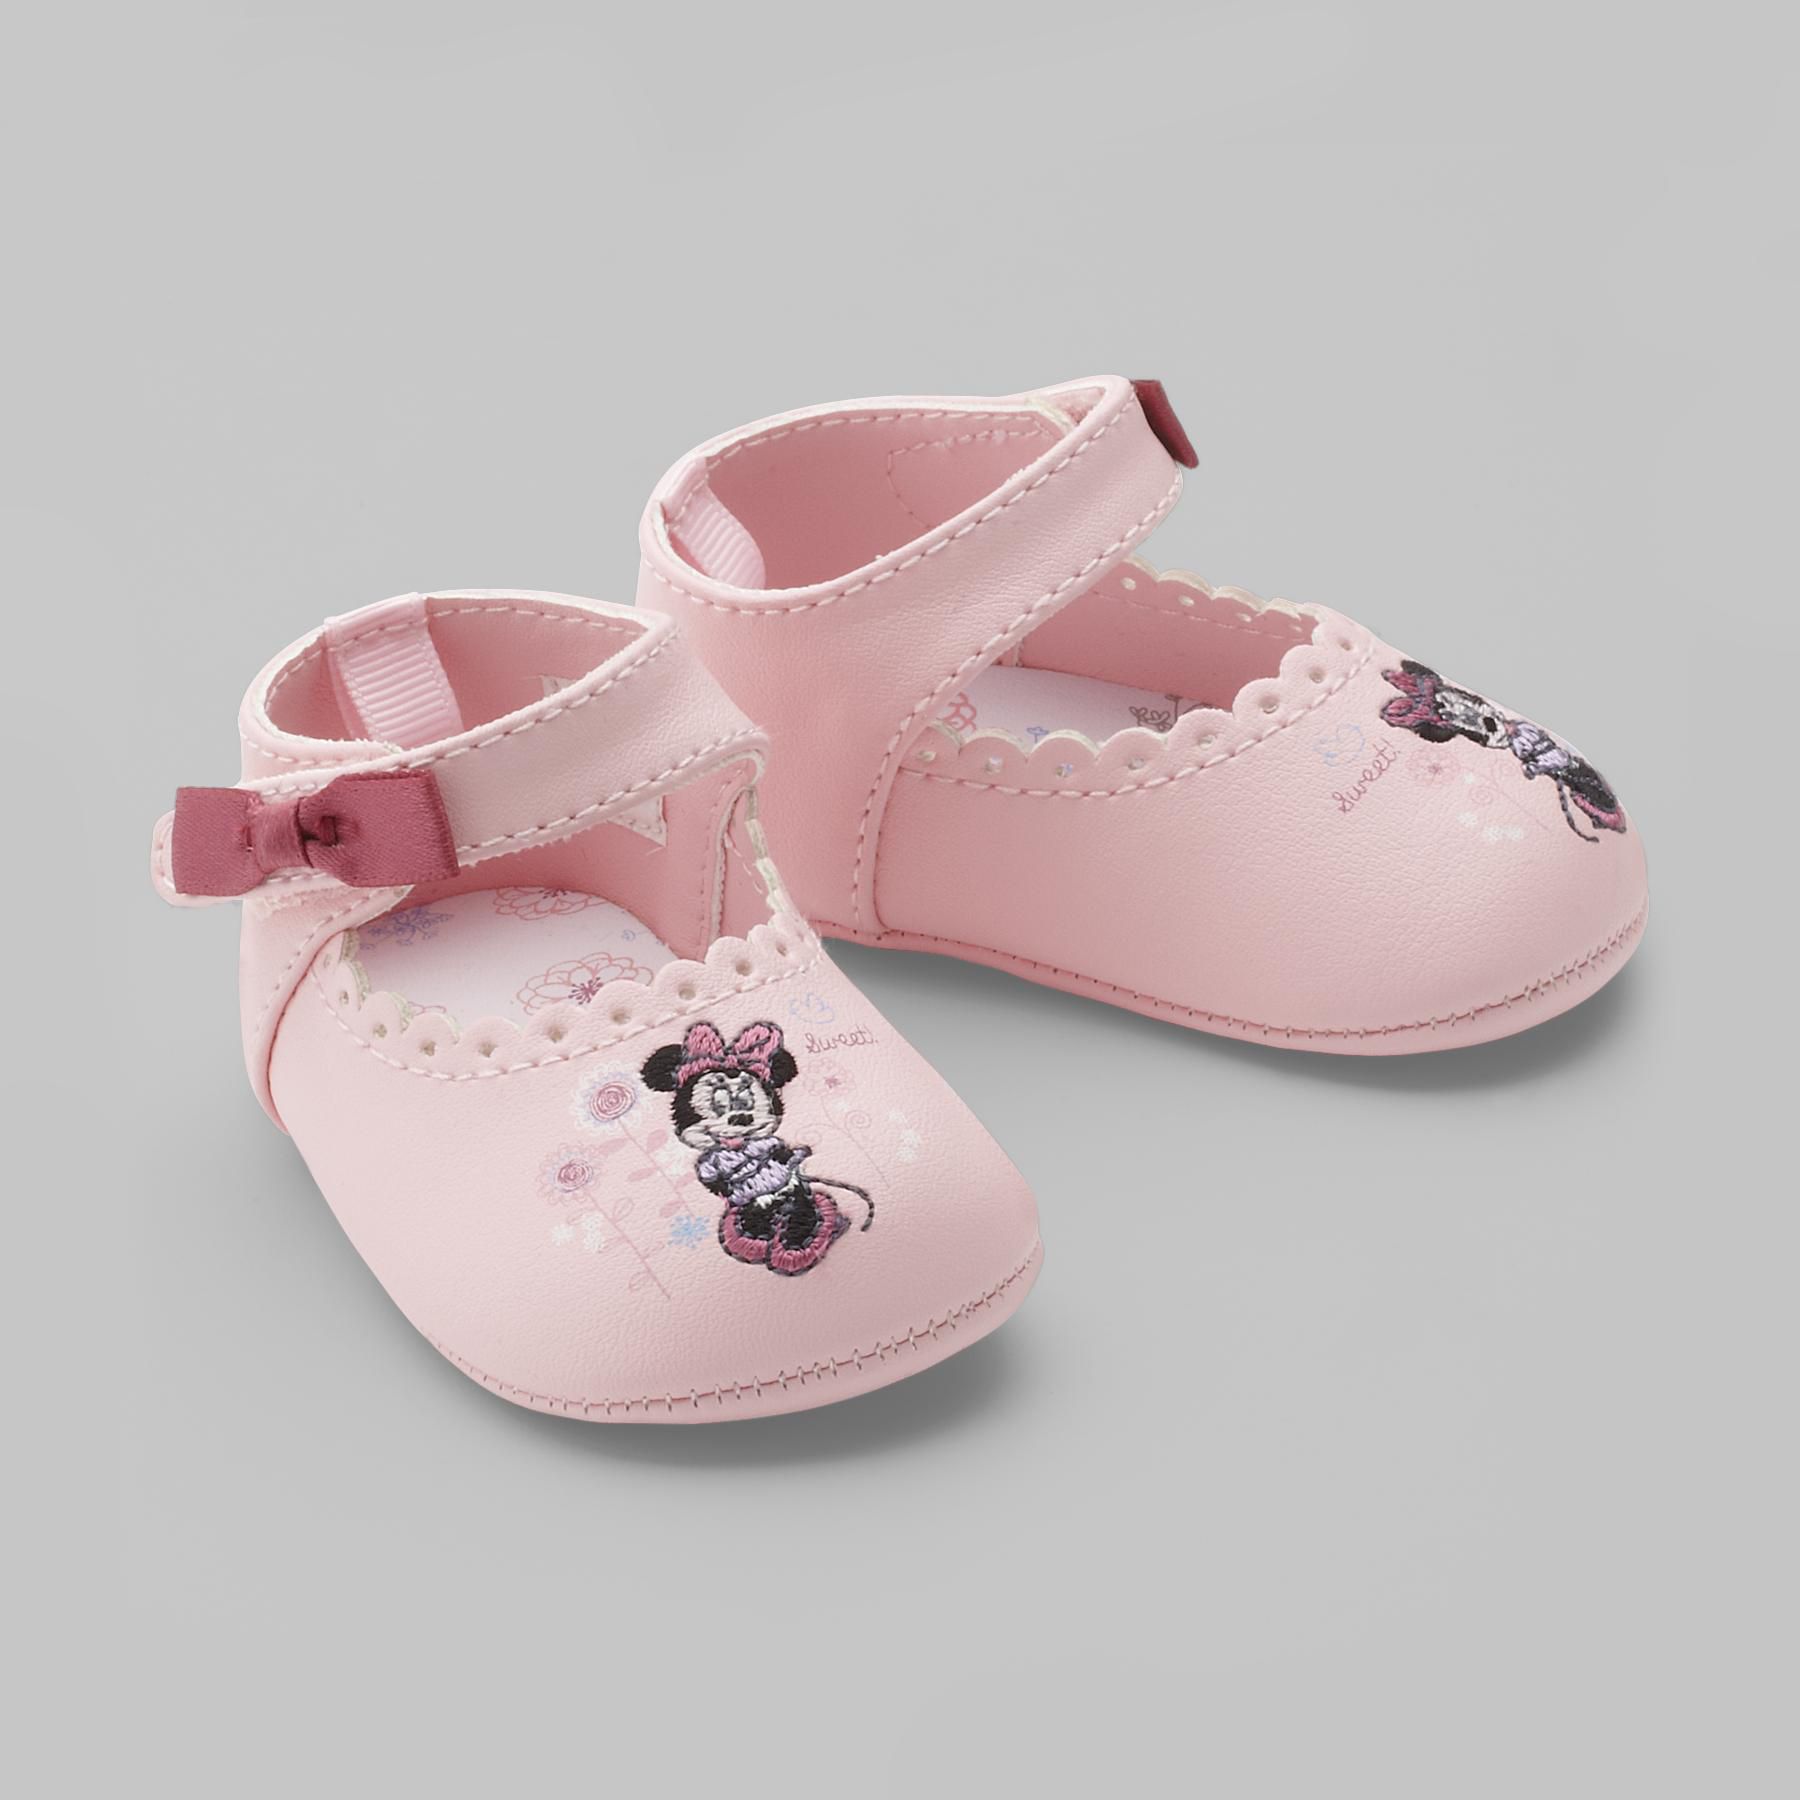 Disney Minnie Mouse Infant Girl's Mary Jane Shoes